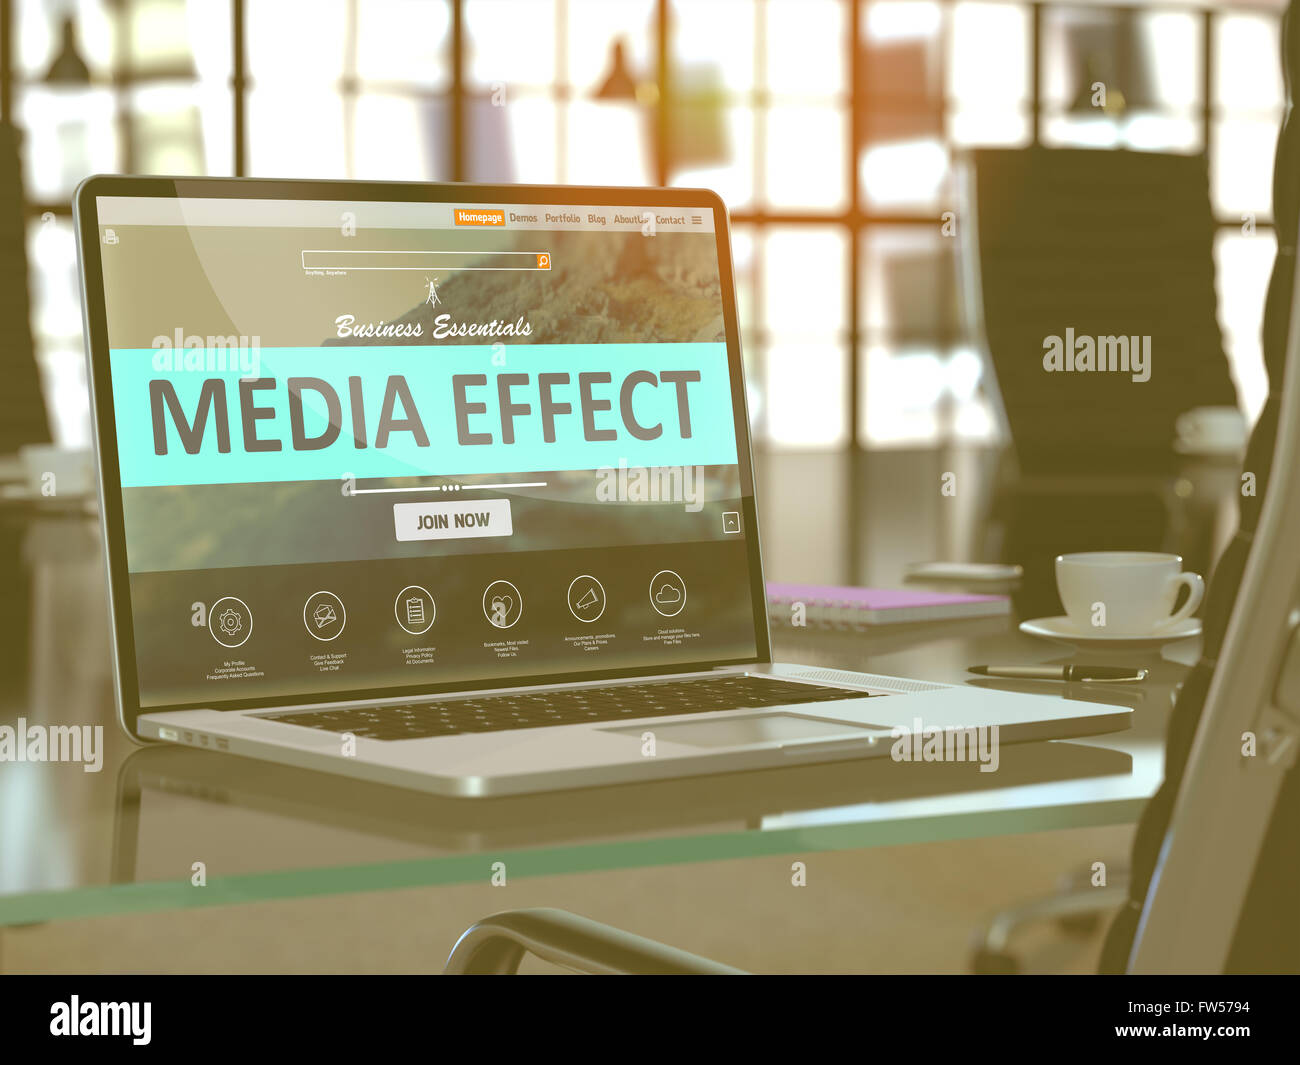 Laptop Screen with Media Effect Concept. Stock Photo